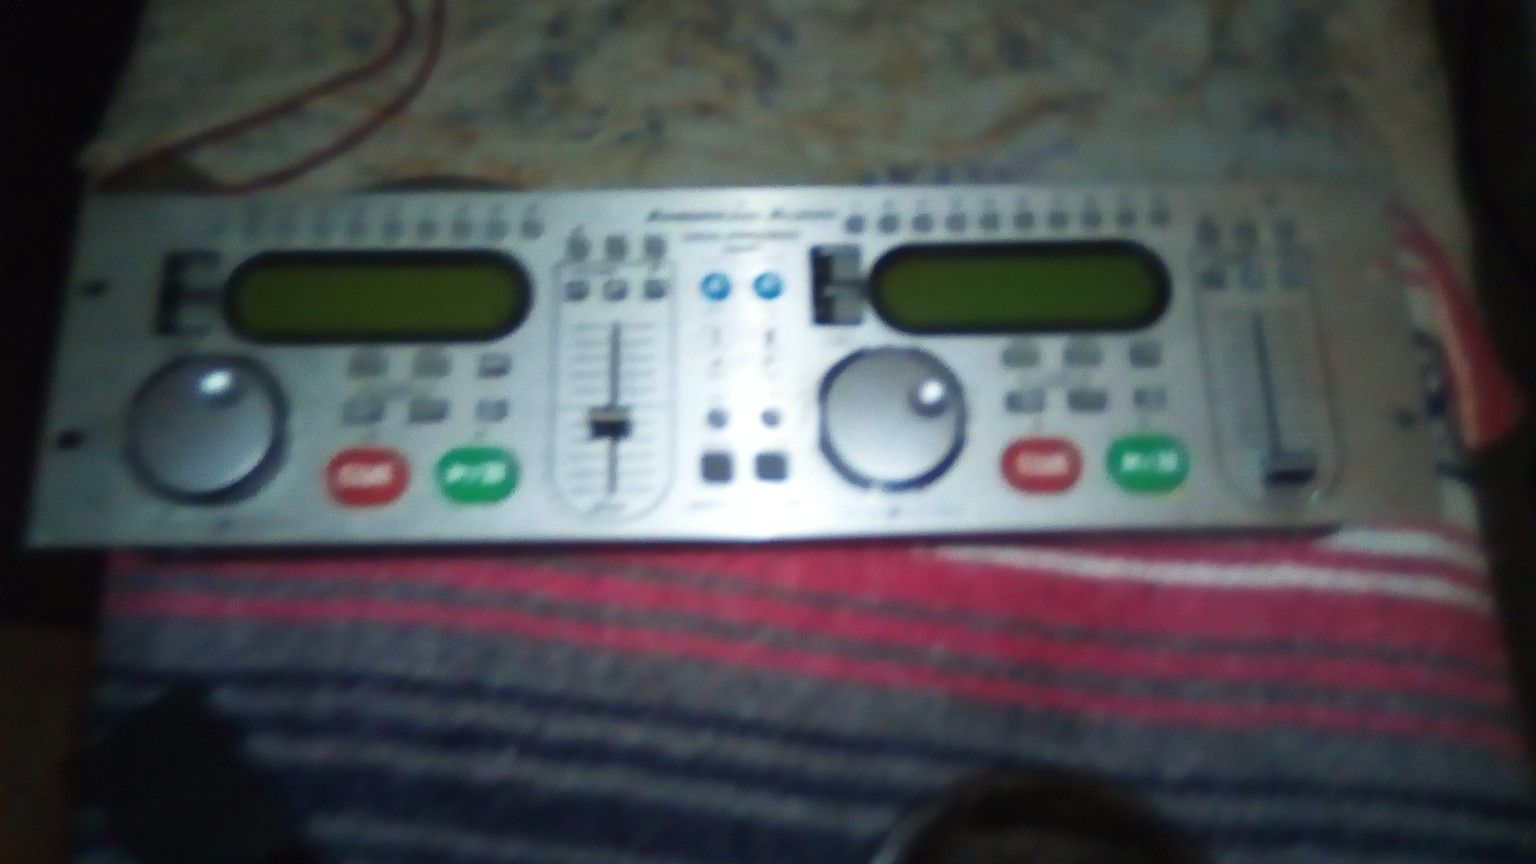 American audio dcd pro 300 mk2 dual CD player 110or best offer